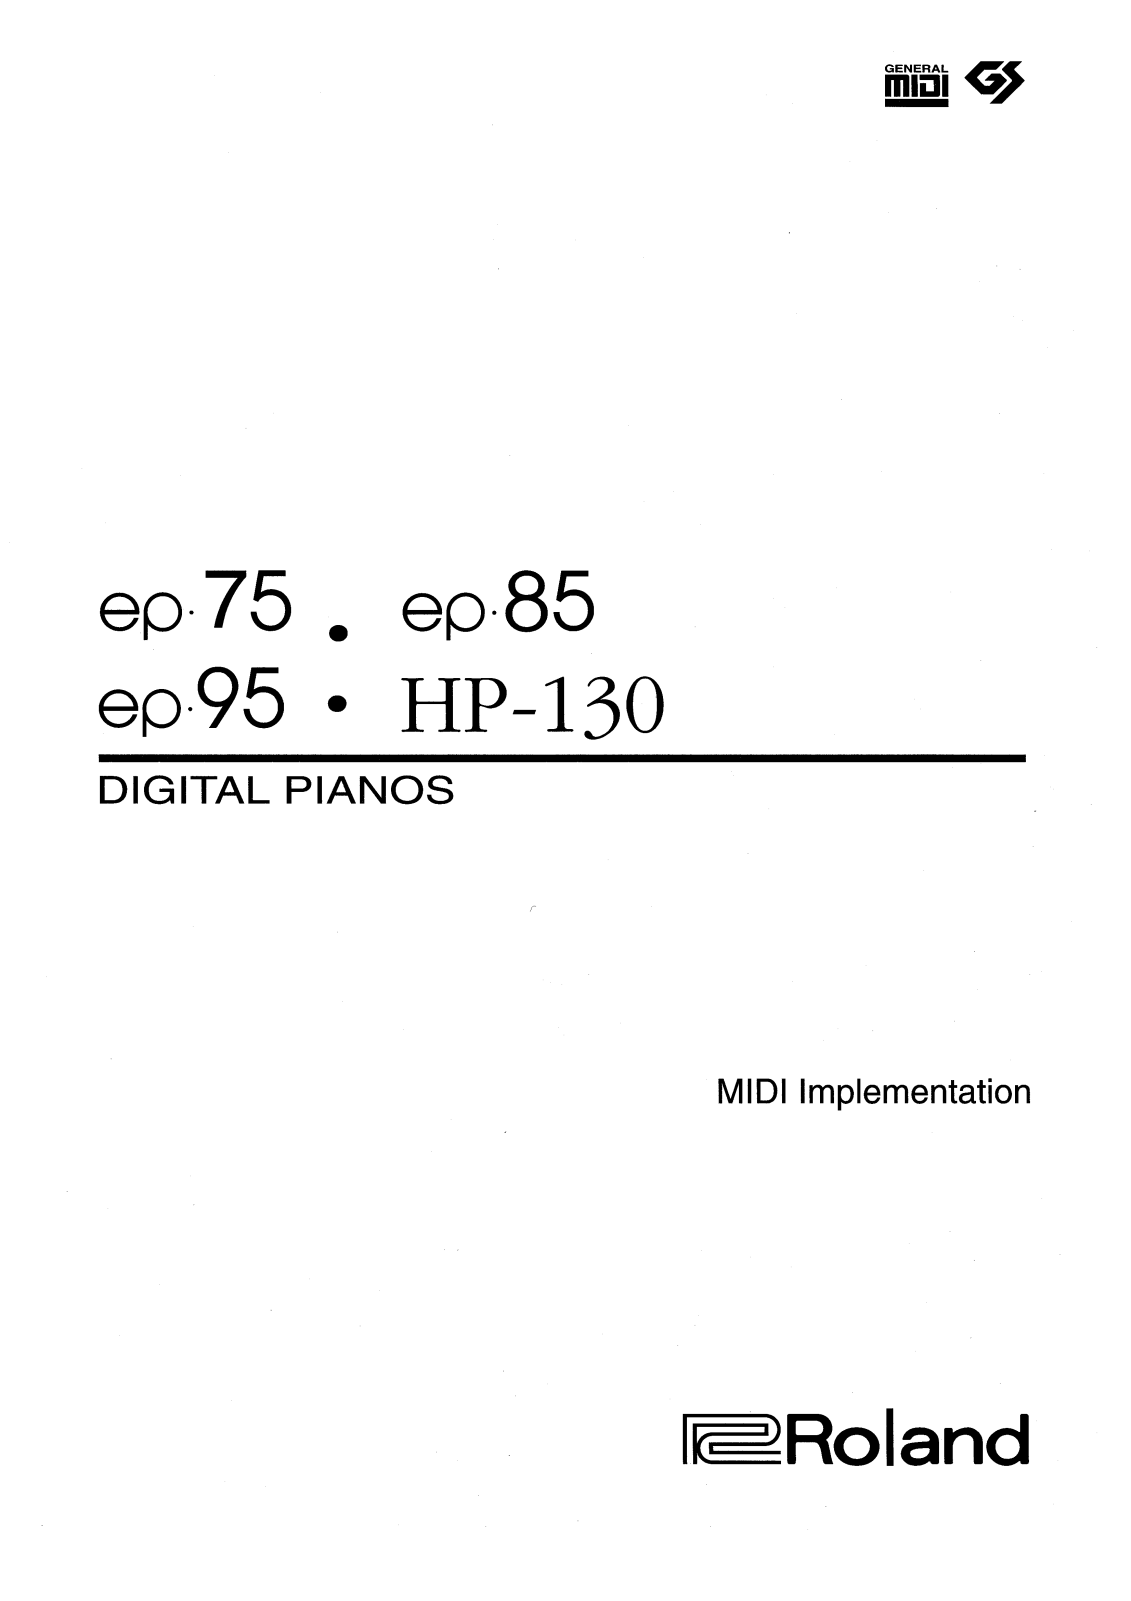 Roland EP 95, HP130, EP 75, EP 85 Service Manual